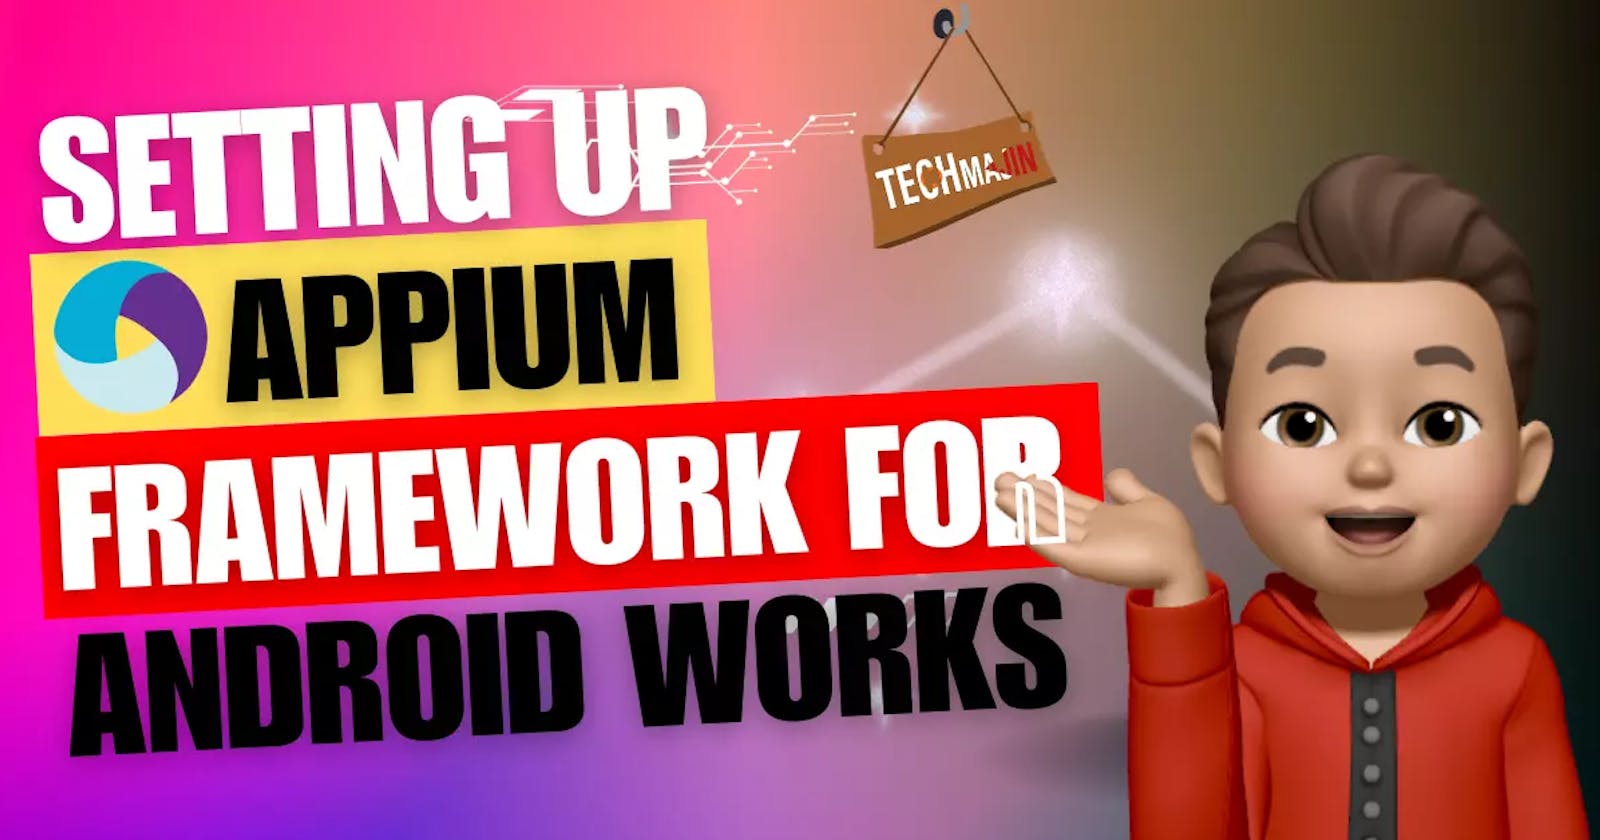 How Setting Up Appium Framework For Android Works